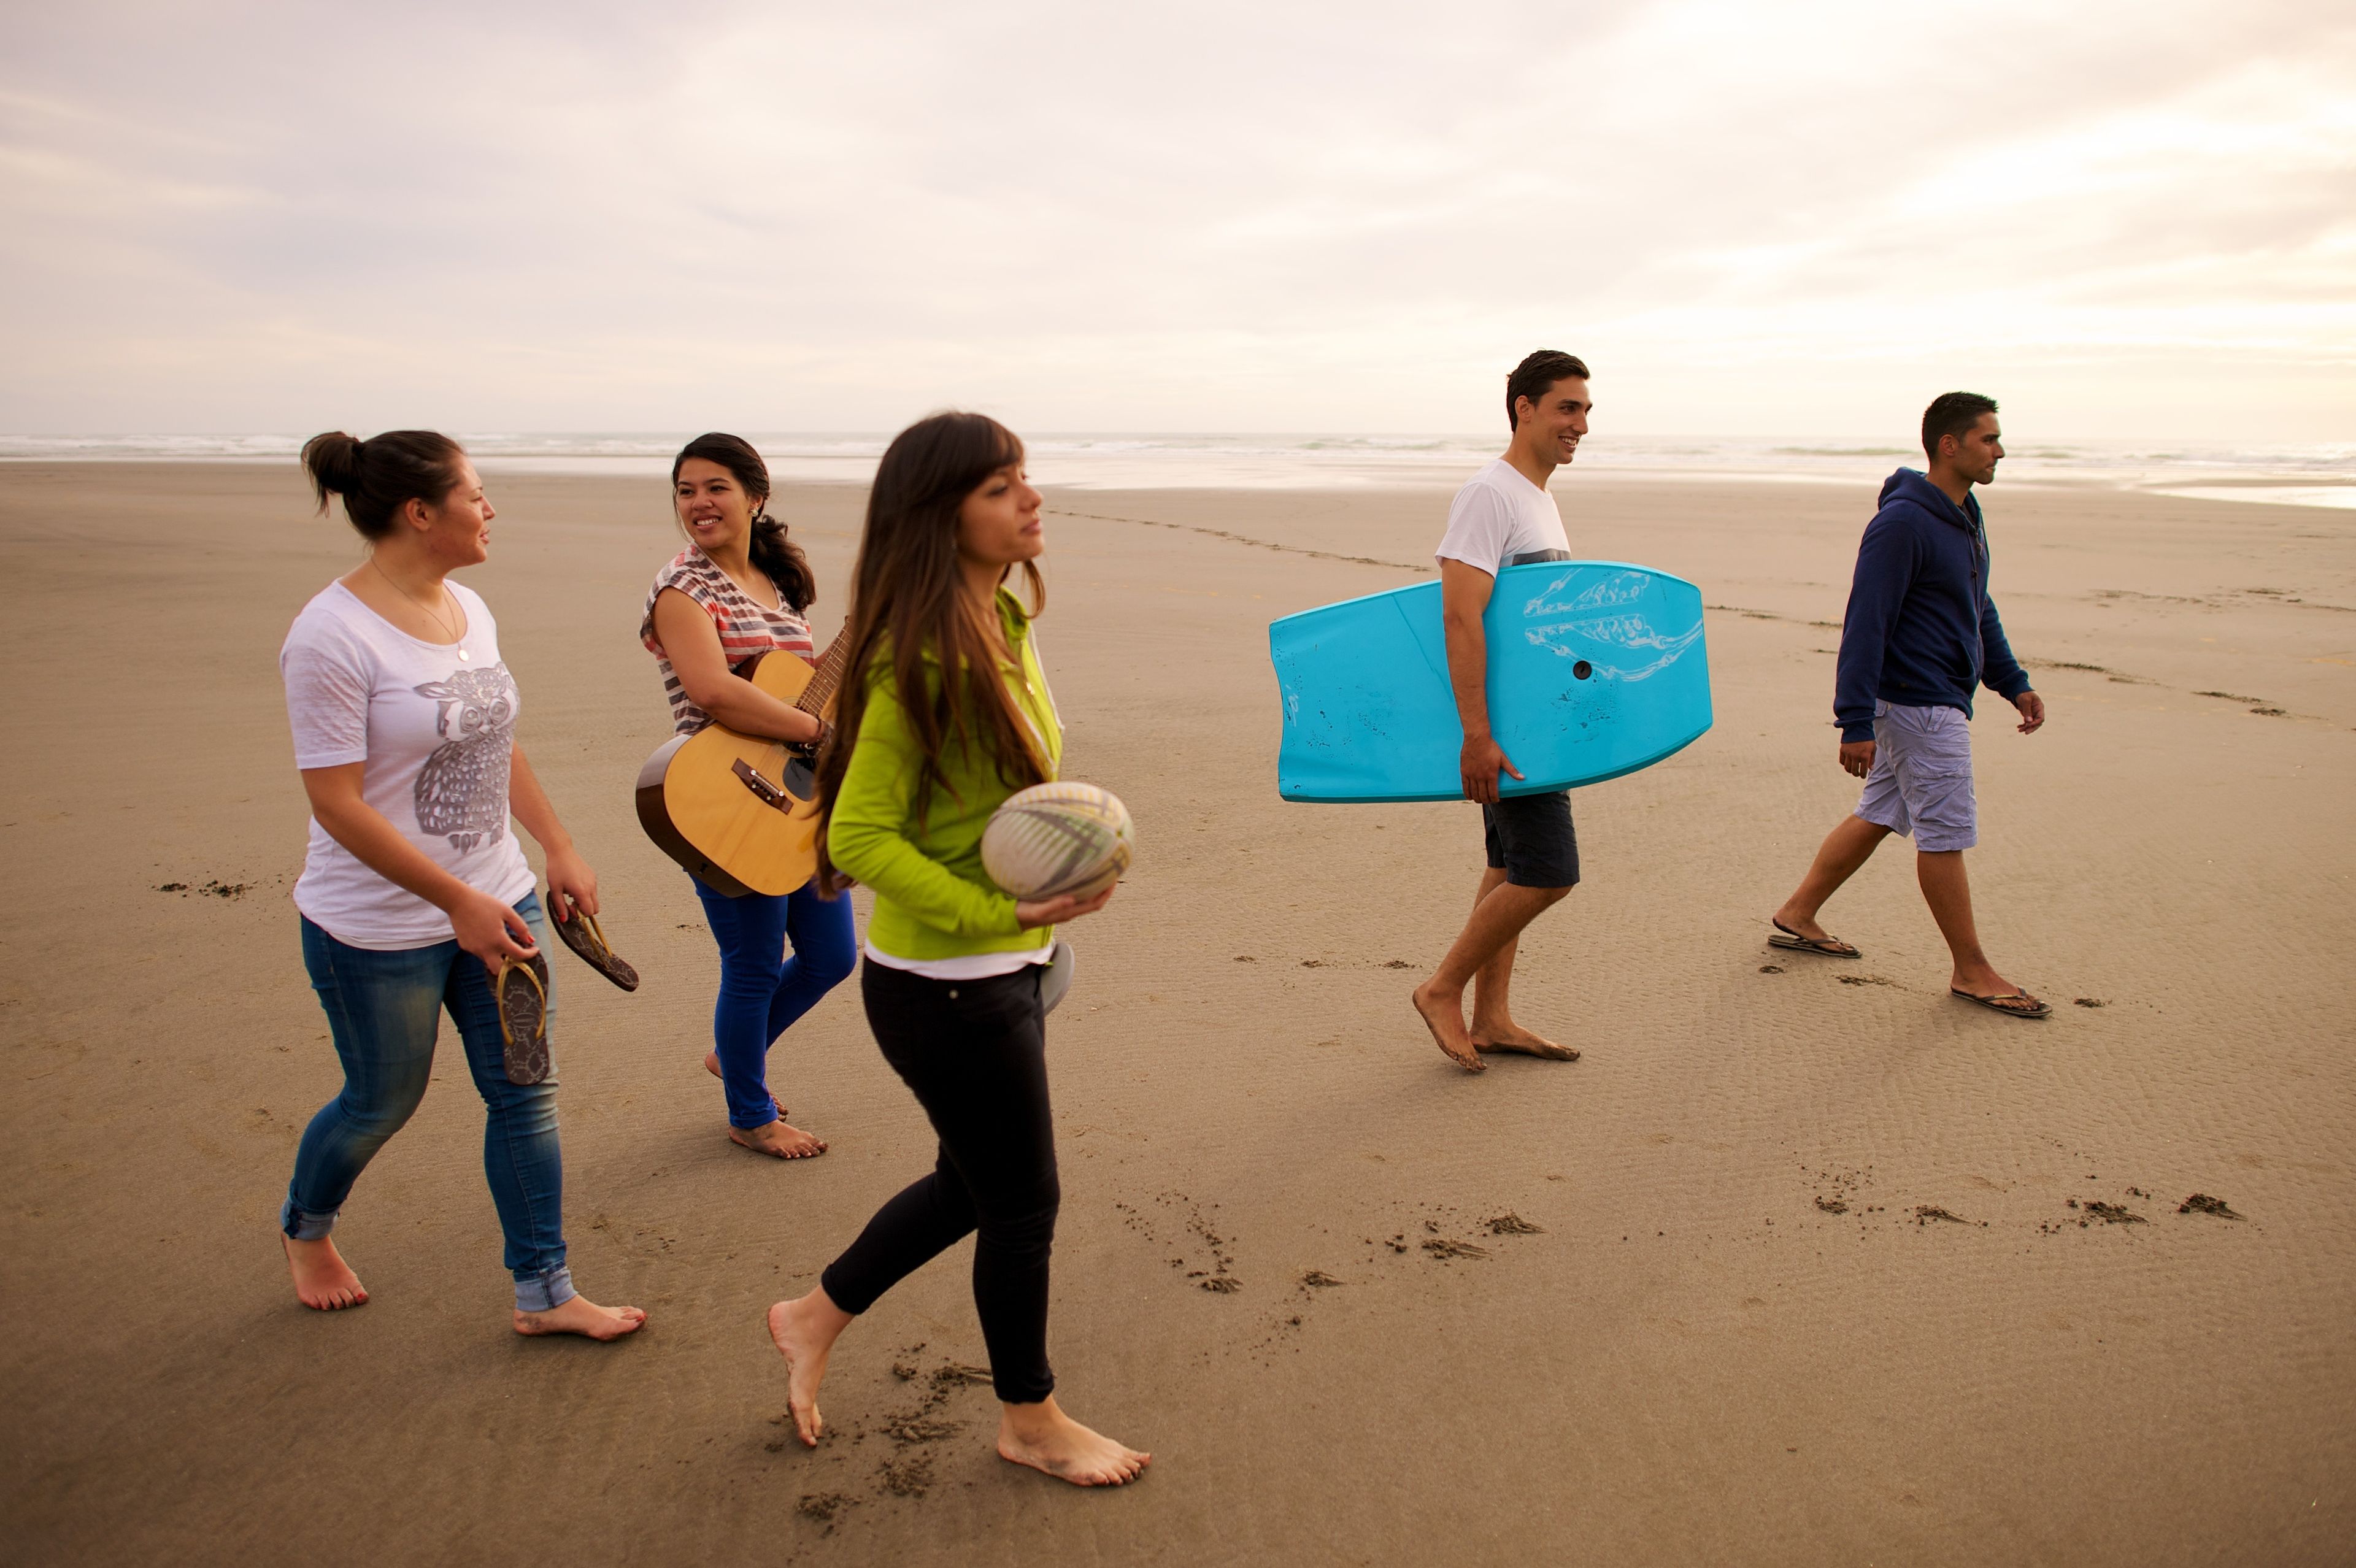 A group of youth go out on the beach together to bodyboard, play ball, and play guitar.